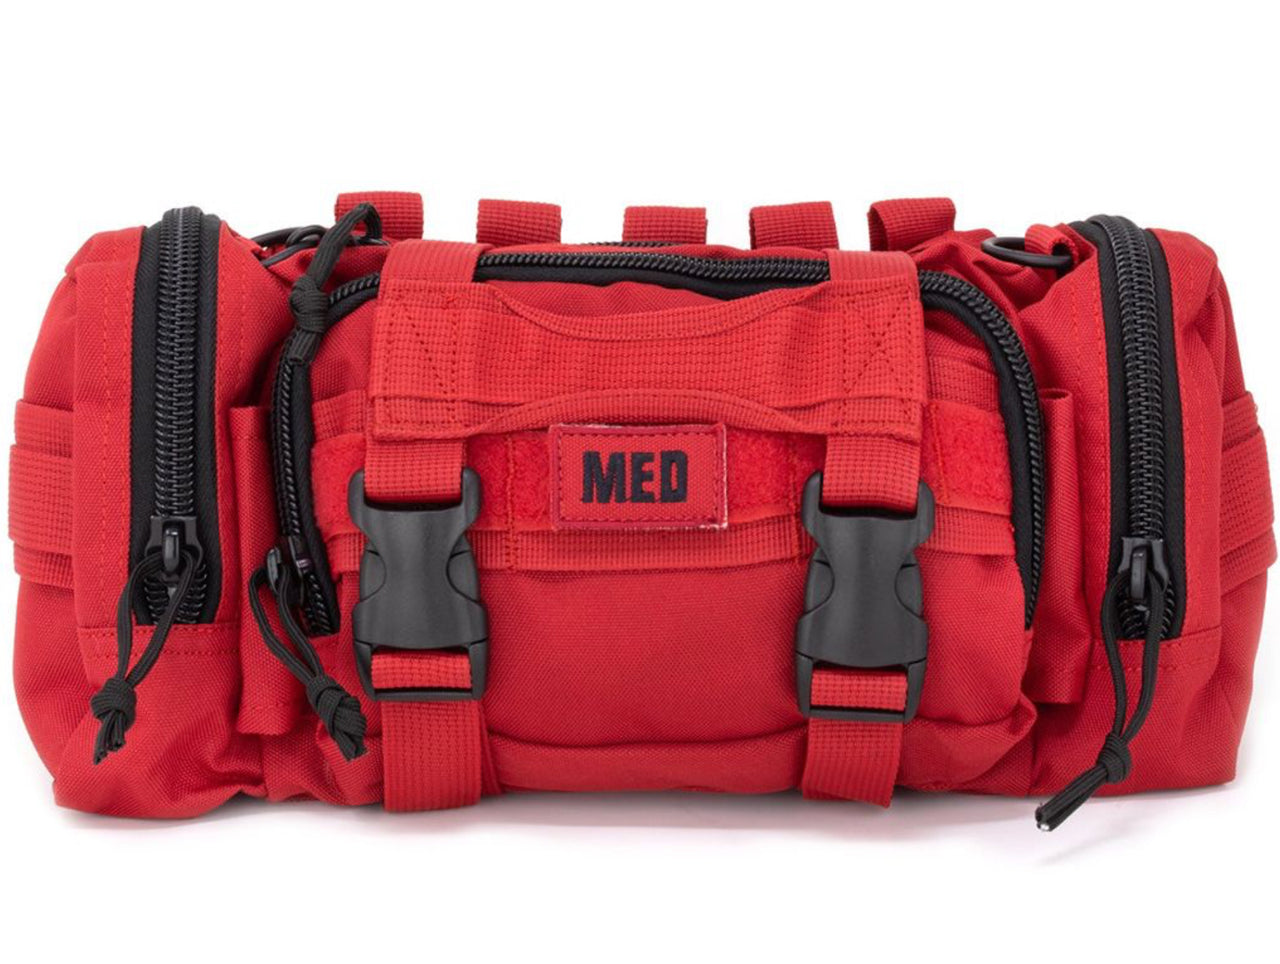 FRONT RUNNER First Aid Rapid Response Kit - Red